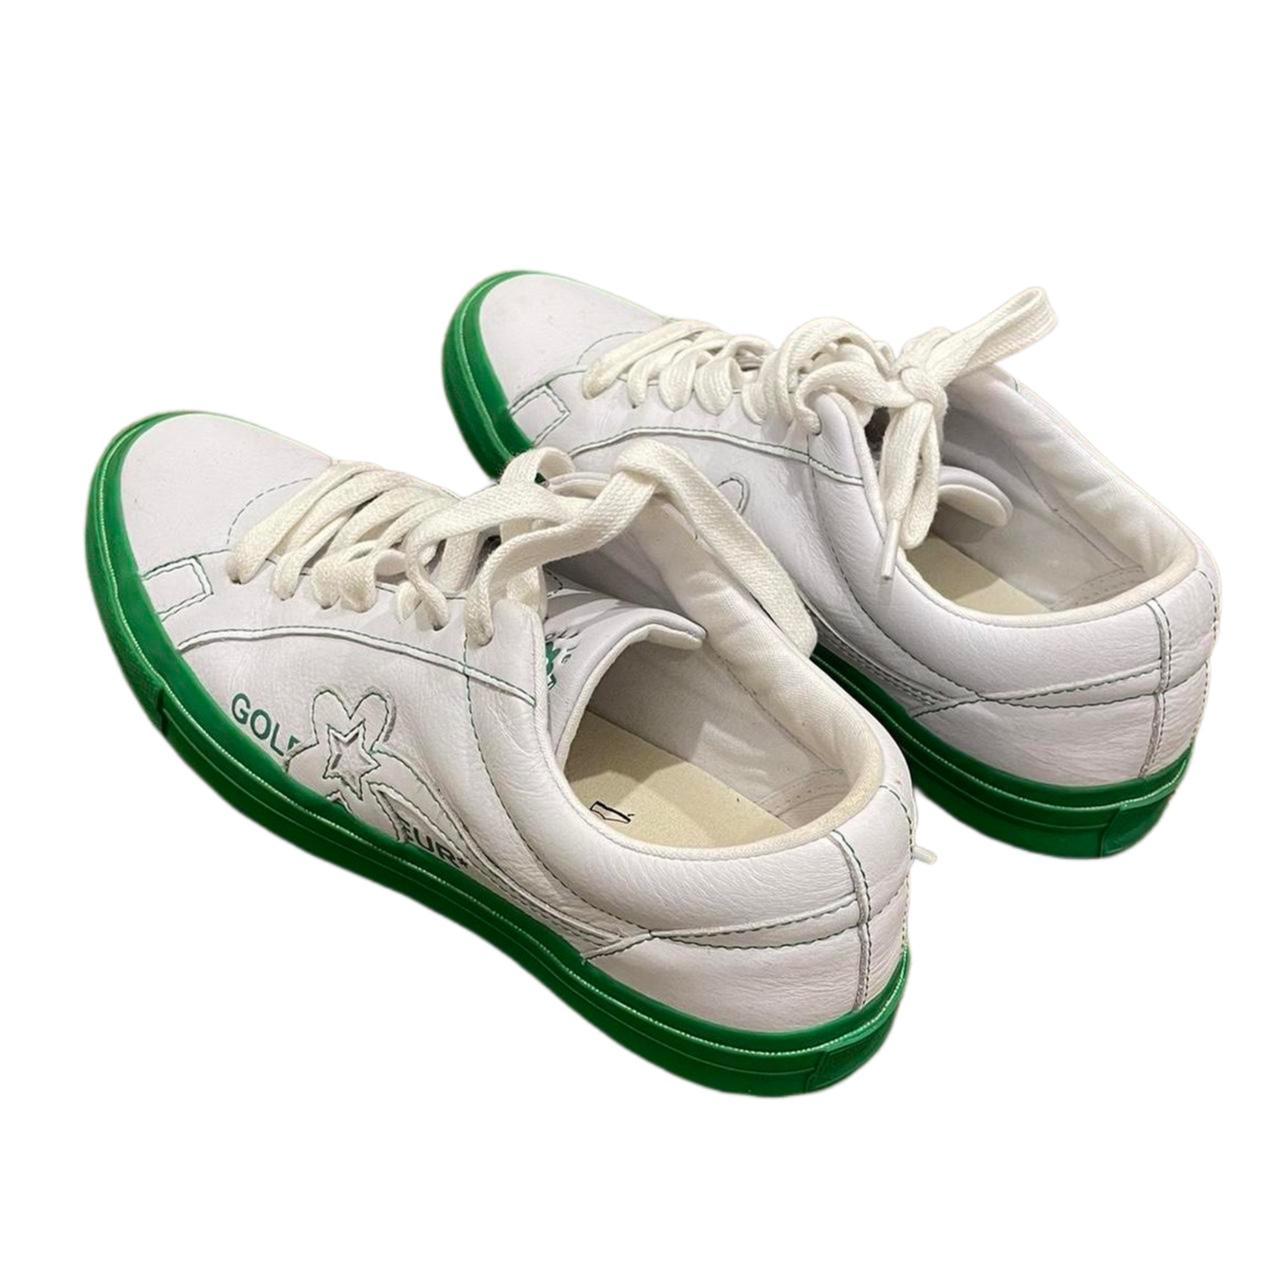 Golf Wang Men's Green and White Trainers (2)